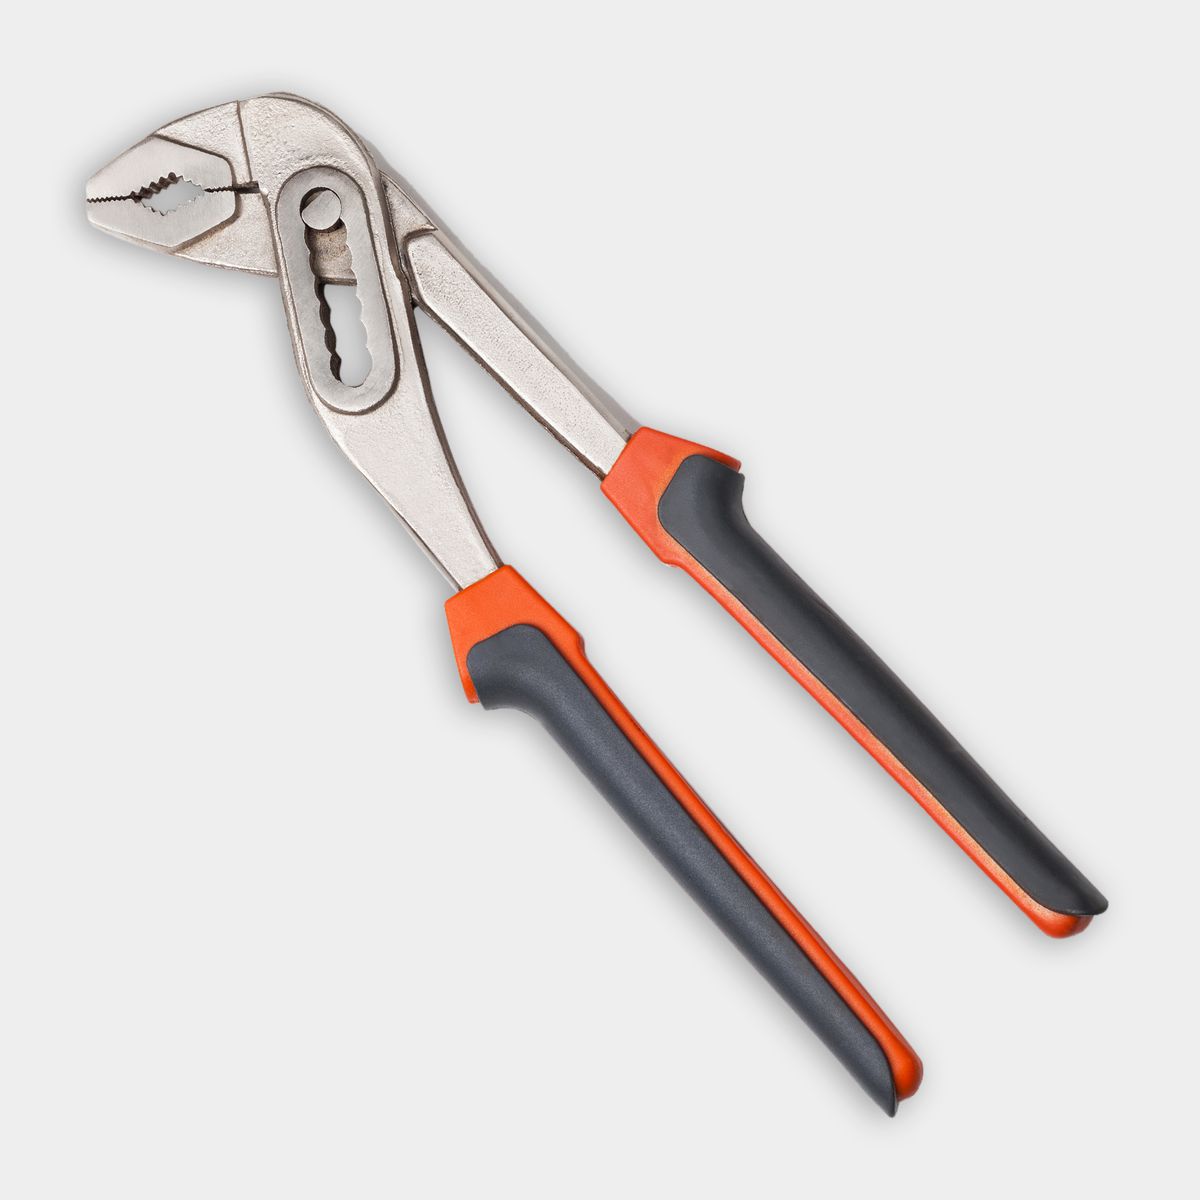 tongue-and-groove pliers